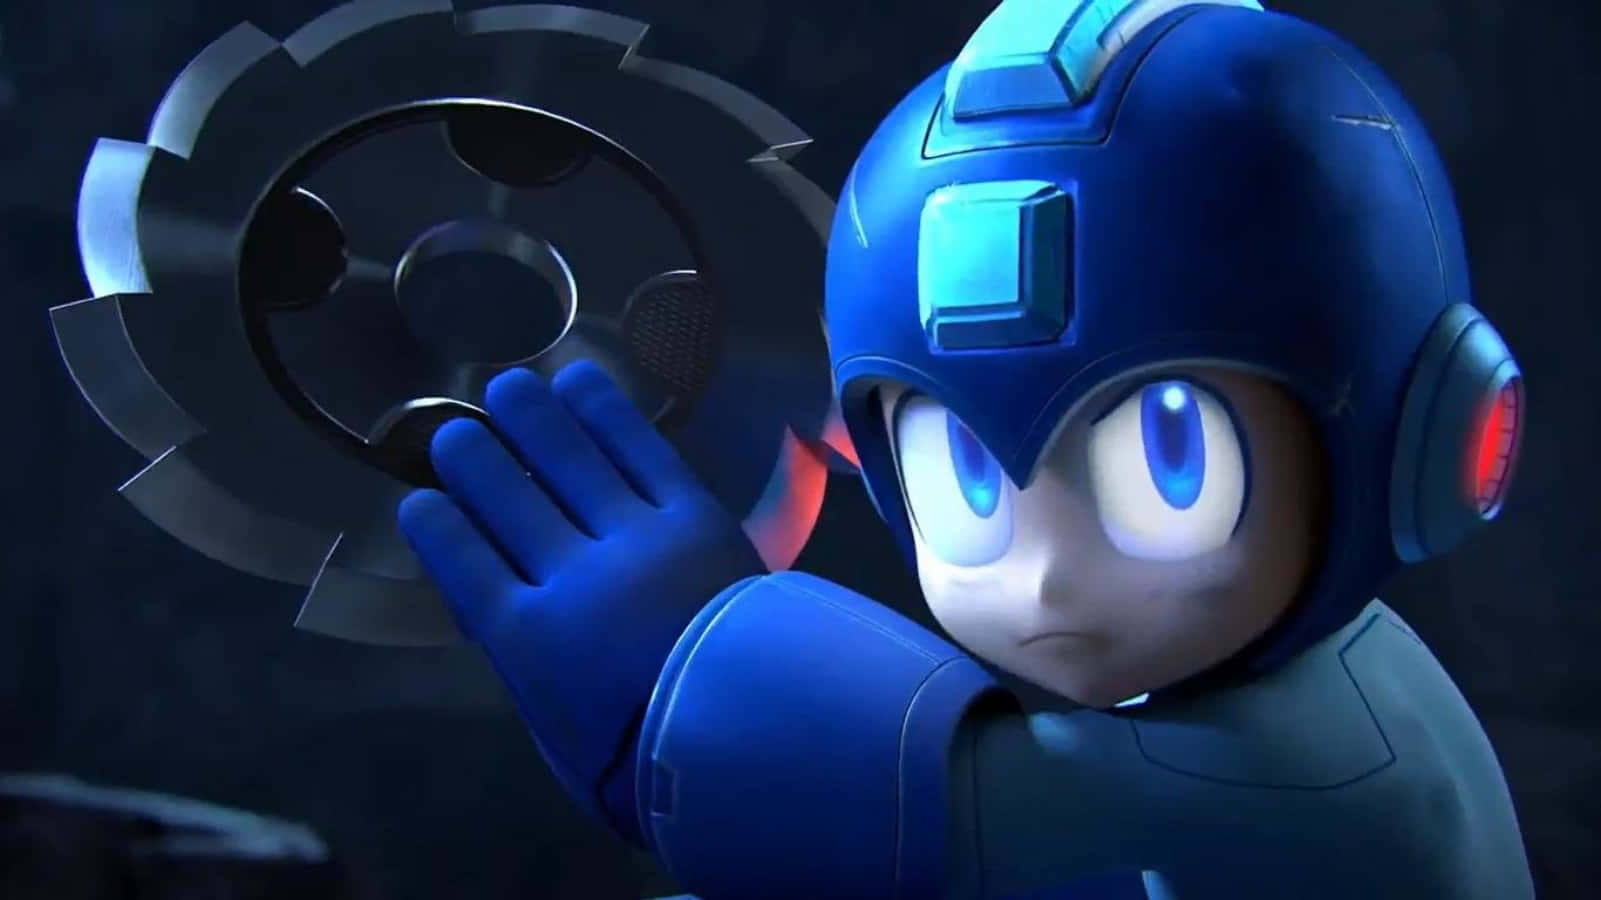 Megaman Super Smash Bros. Would Be Translated To 